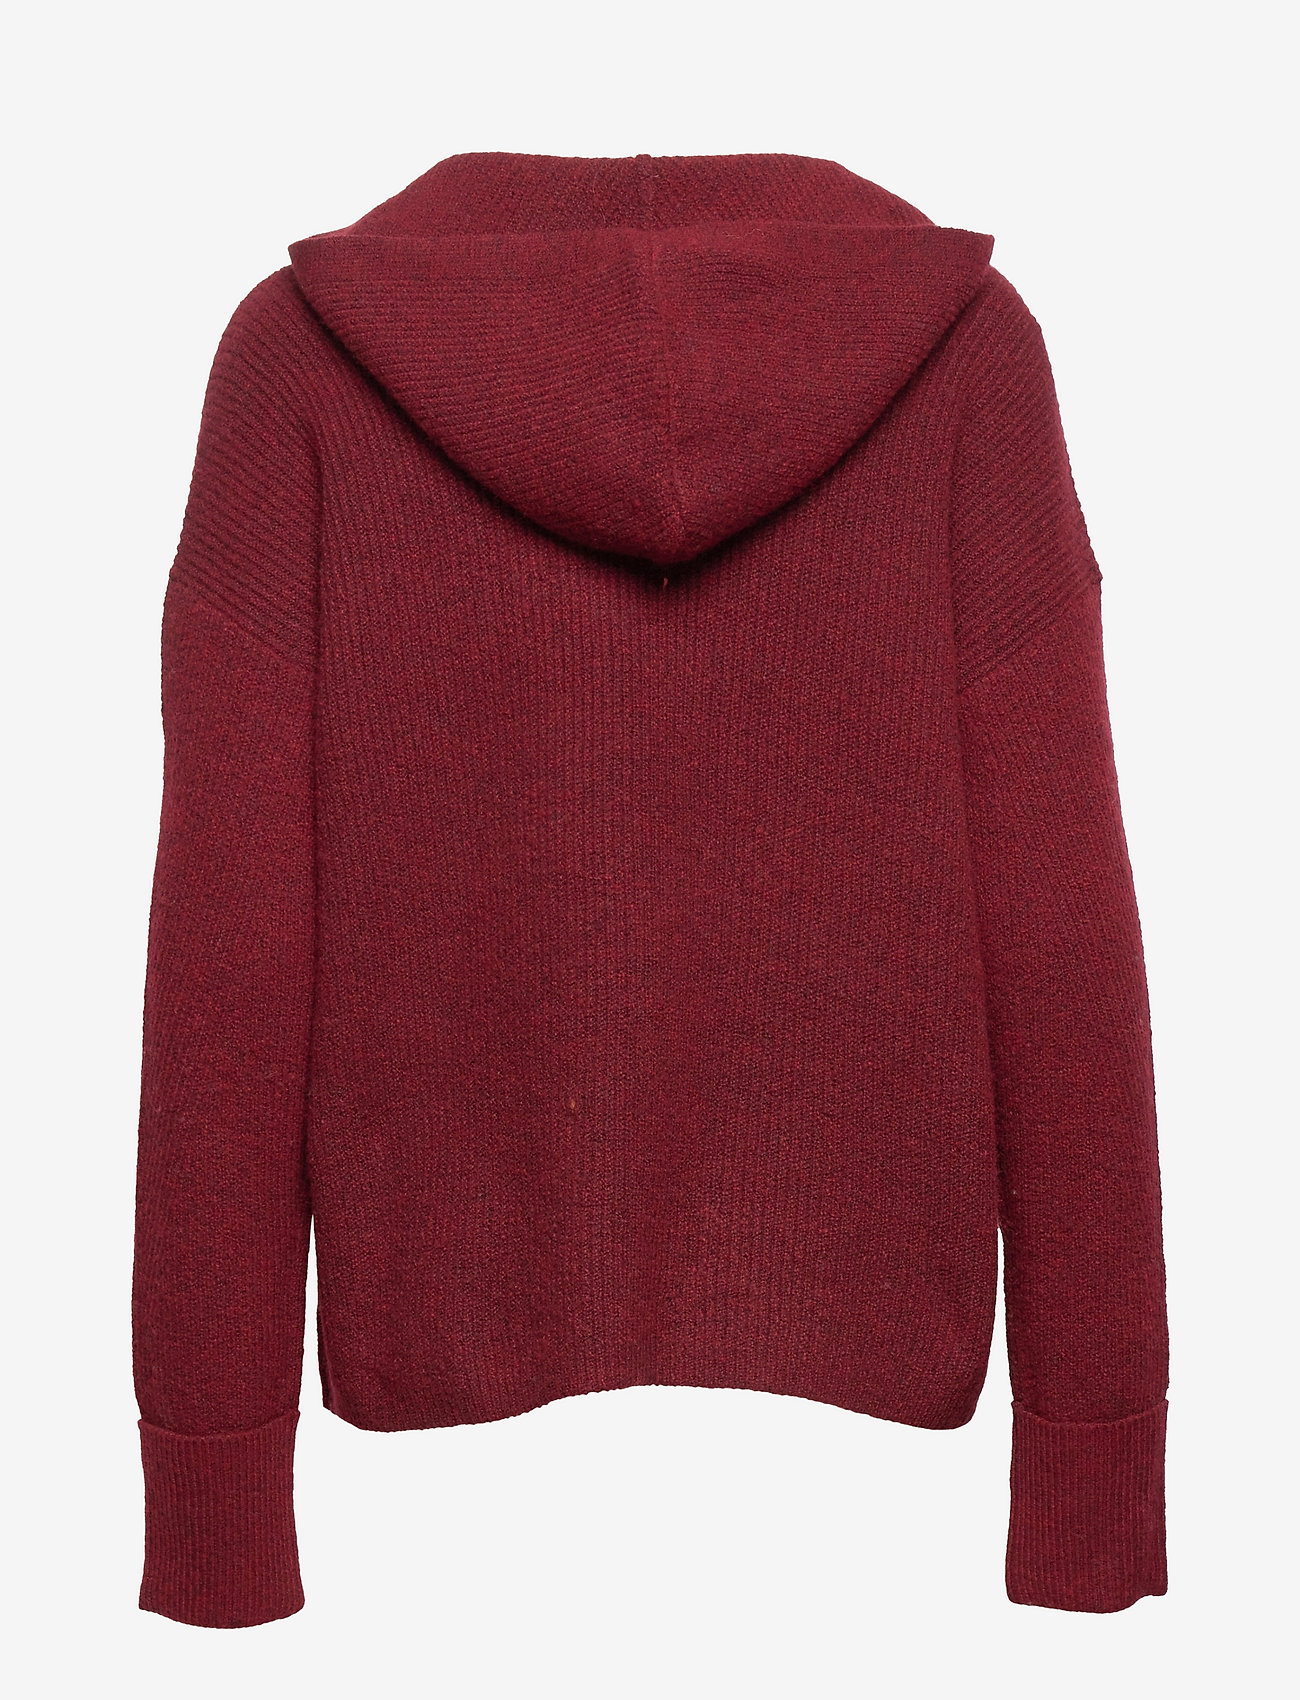 EDC by Esprit - Sweaters - pullover - dark red - 1